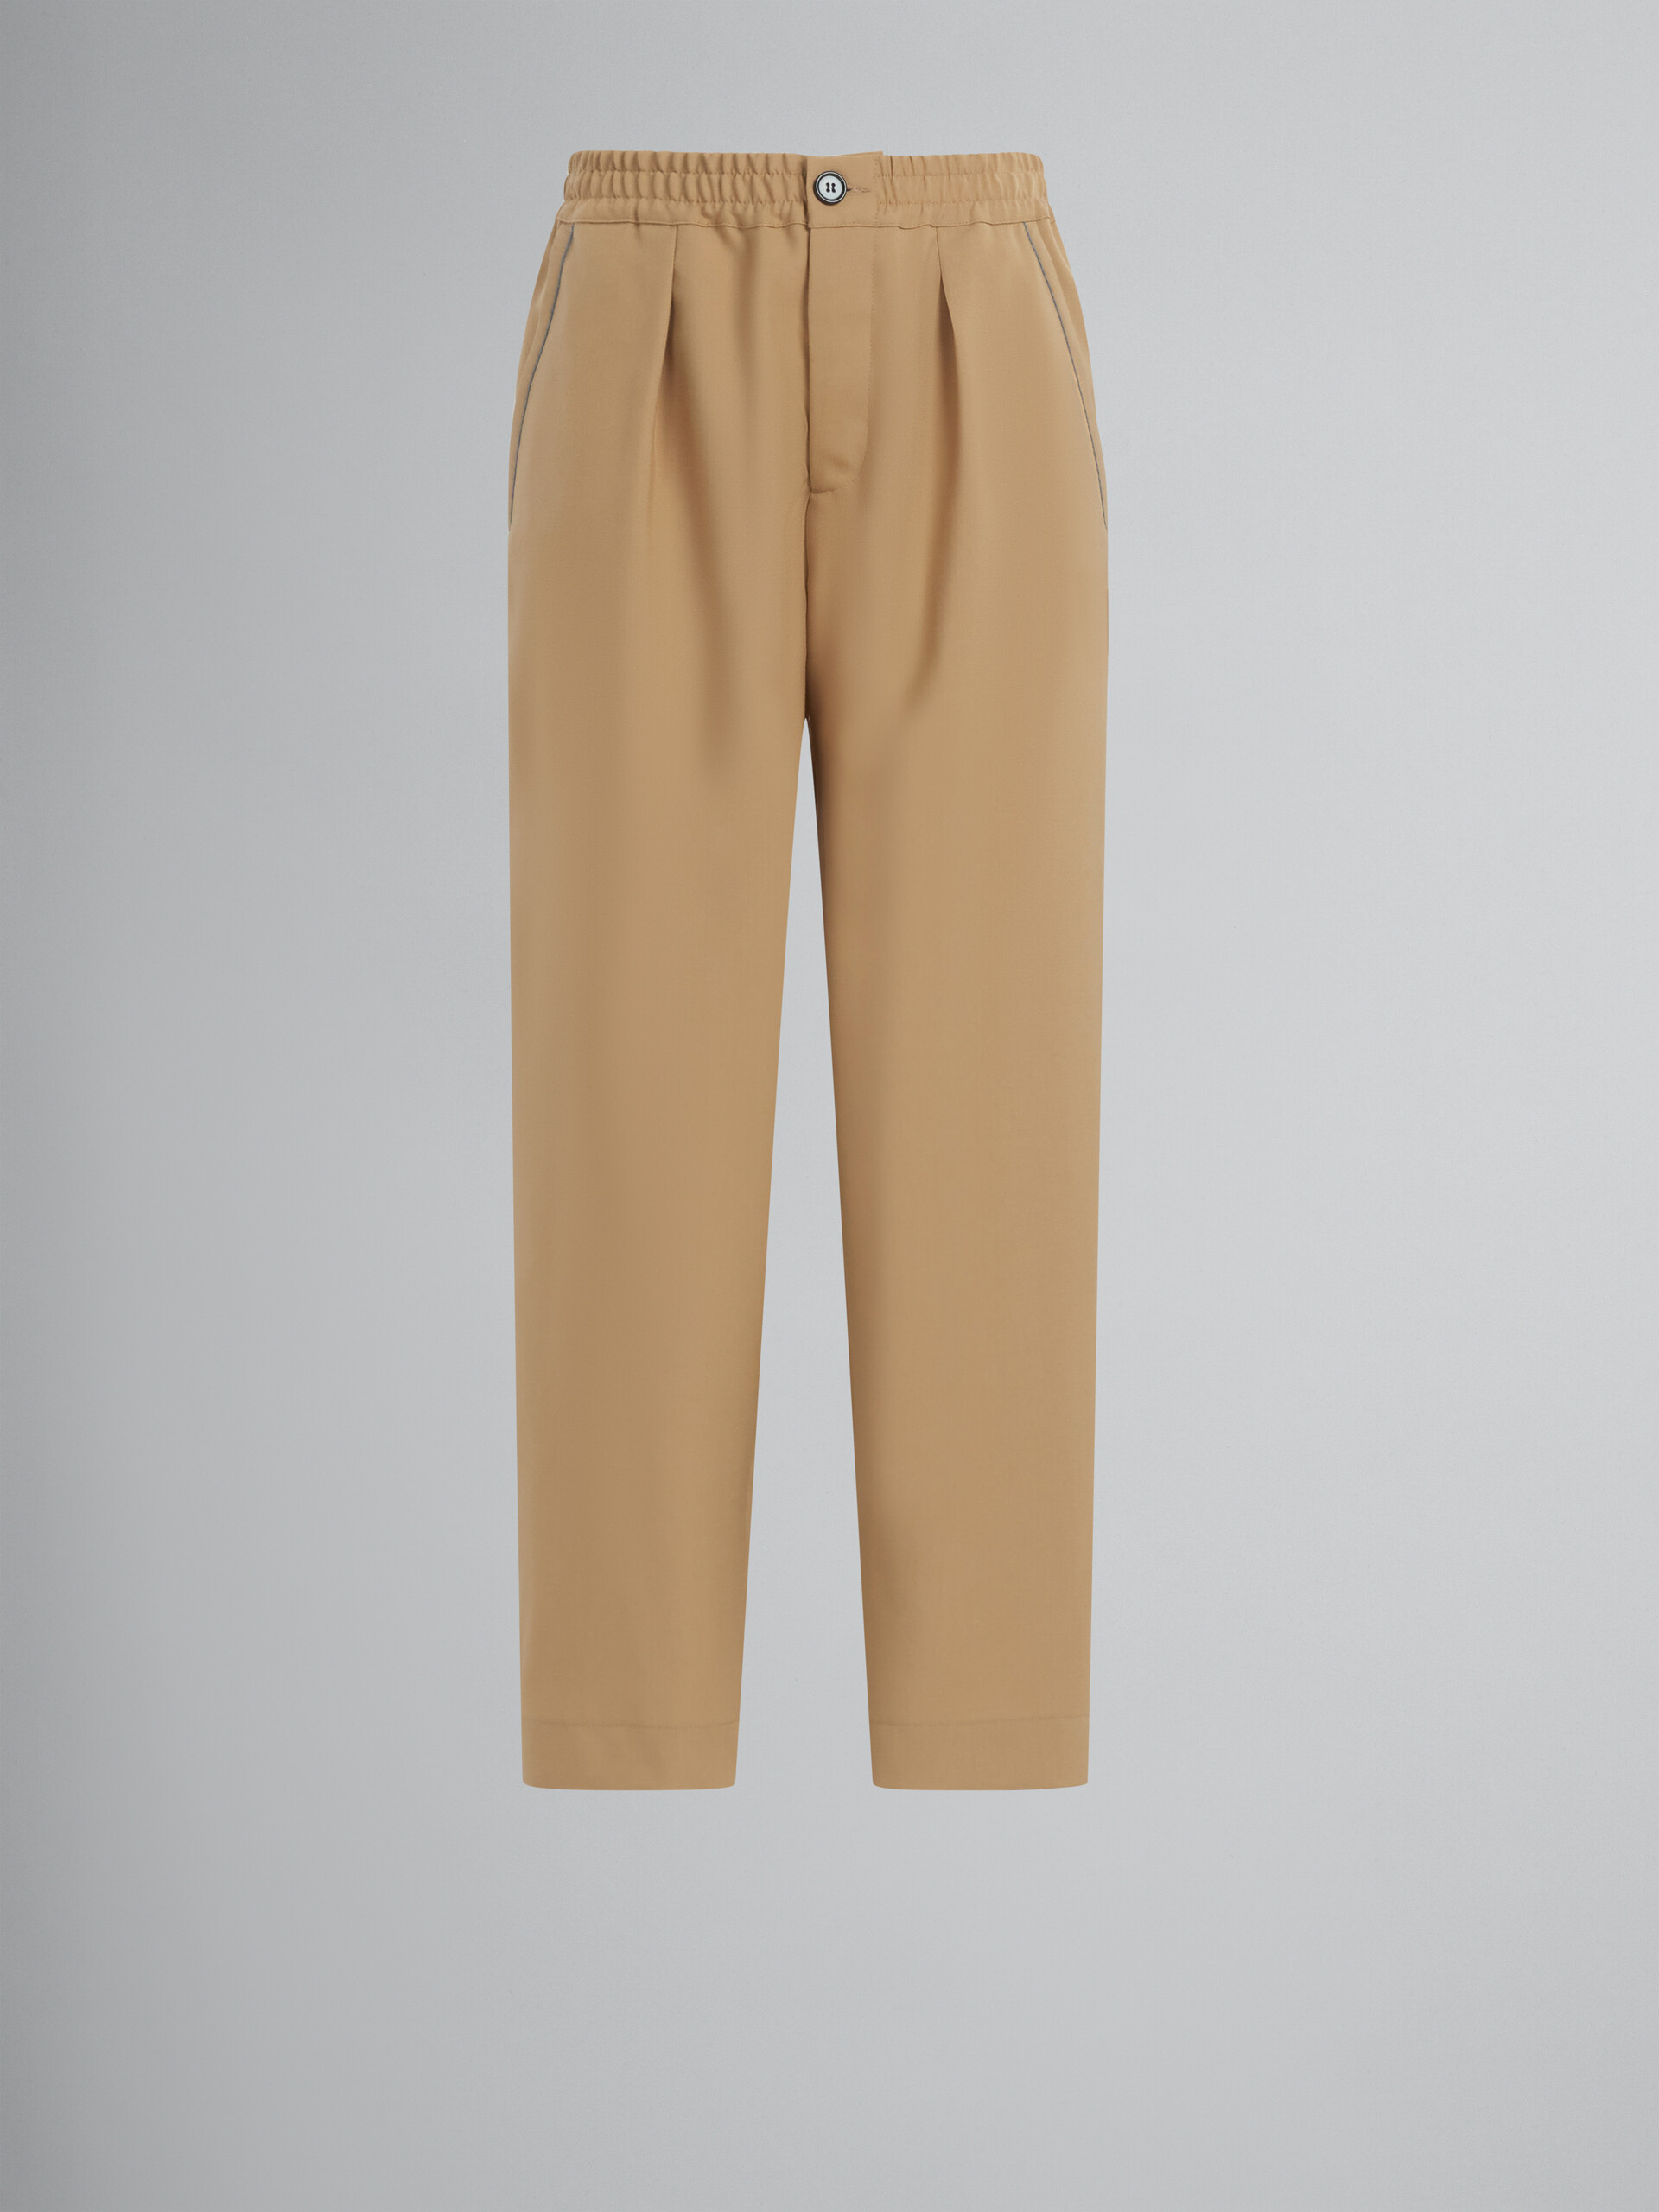 Cropped trousers in beige tropical wool - Pants - Image 1